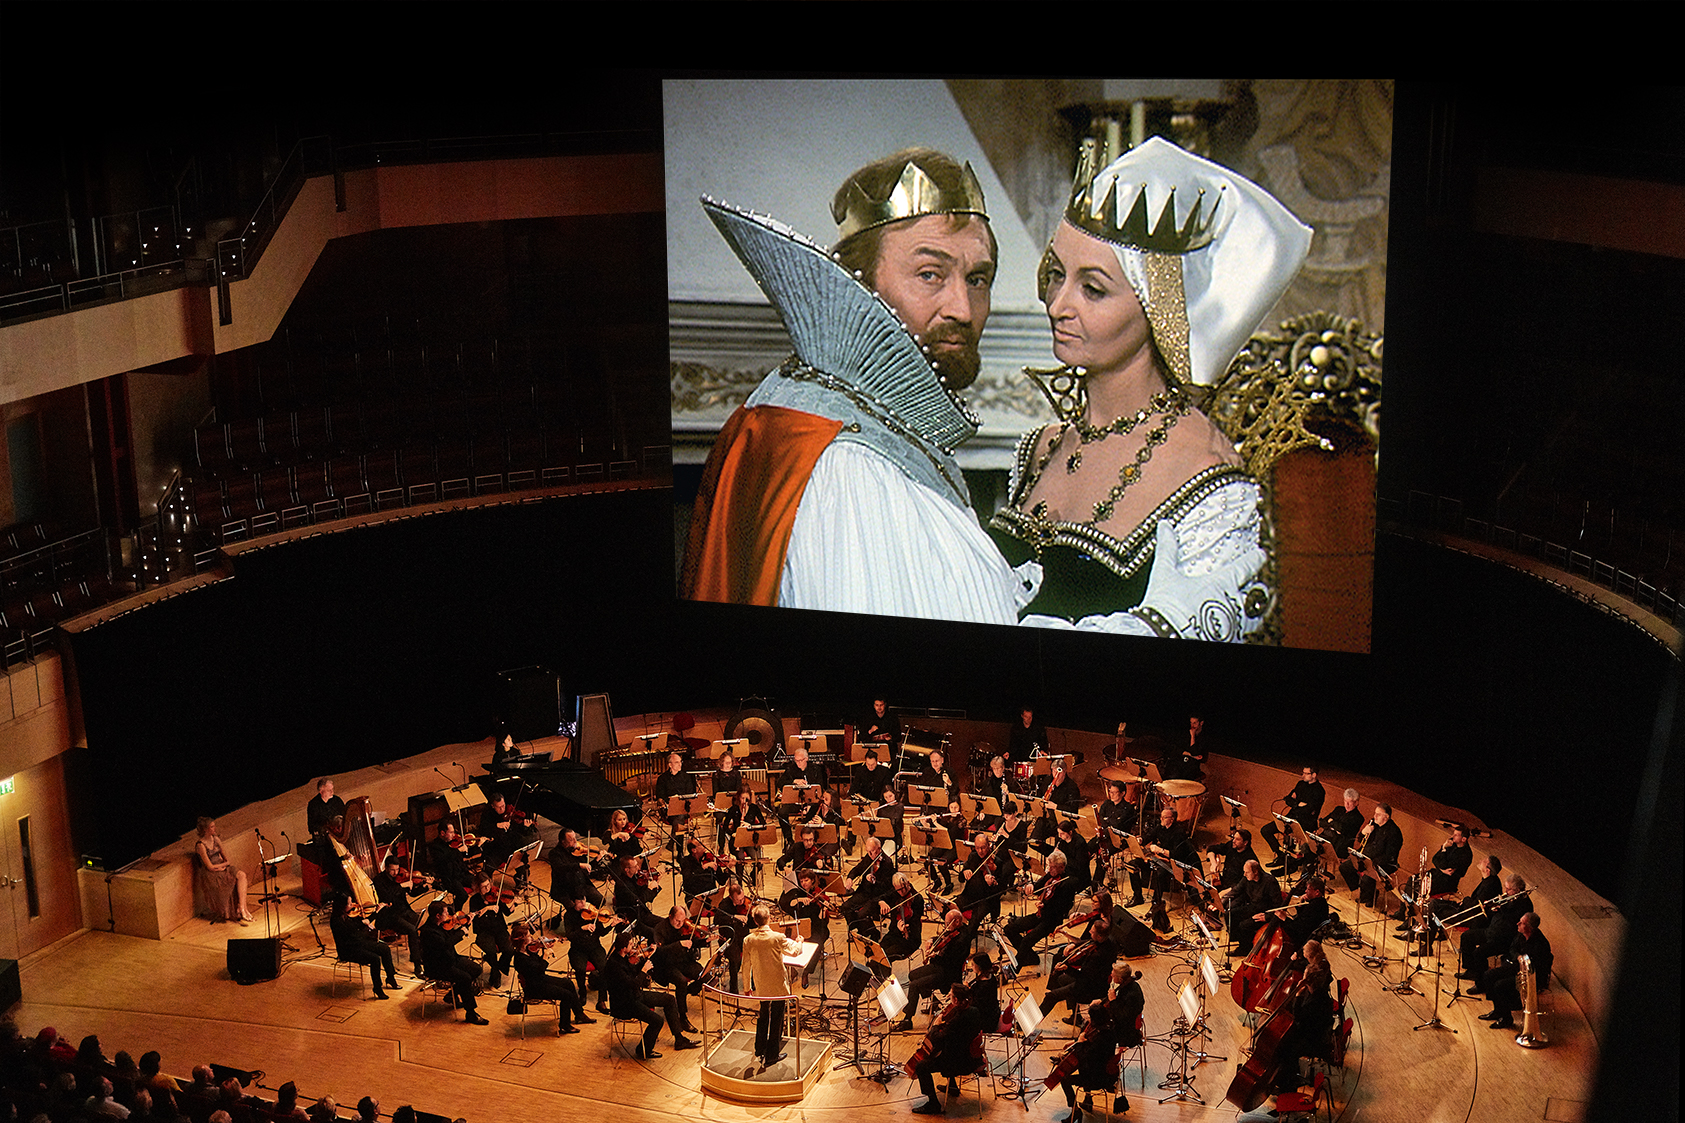 A stage with the orchestra, in the background a screen with a movie scene with the king and queen.